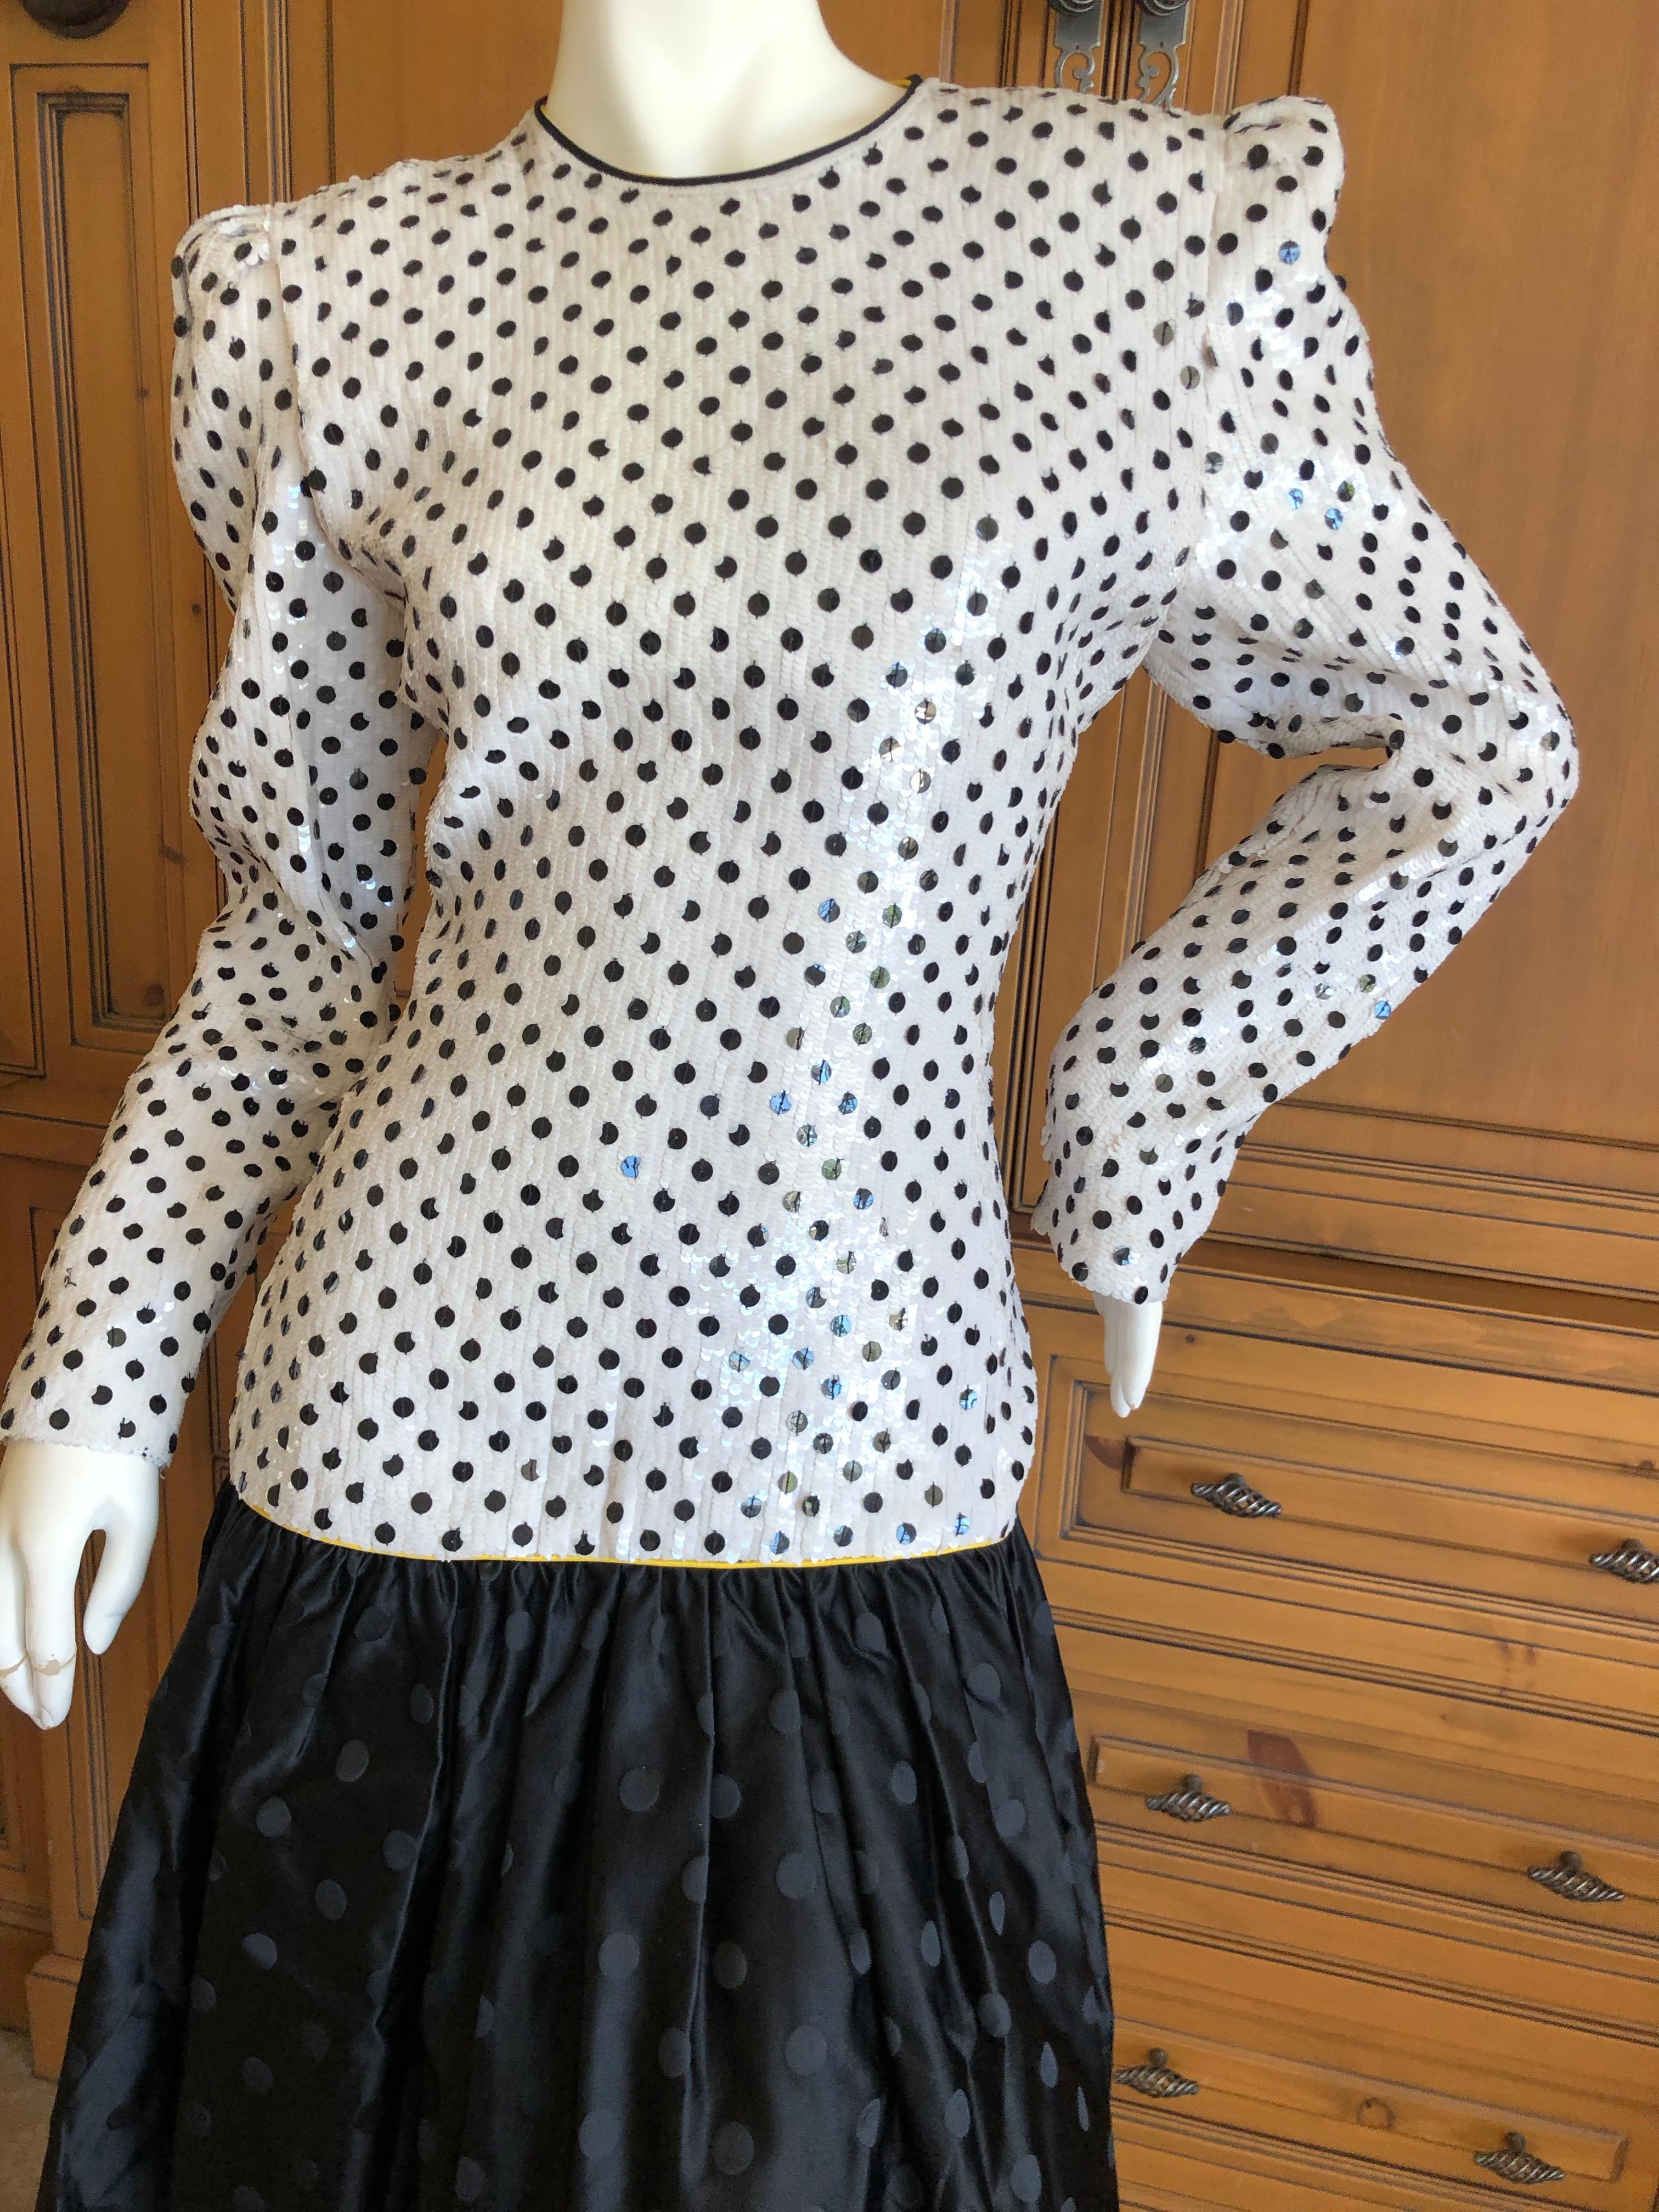 Carolina Herrera 1982 Sequin Black and White Polka Dot Cocktail Dress In Excellent Condition For Sale In Cloverdale, CA